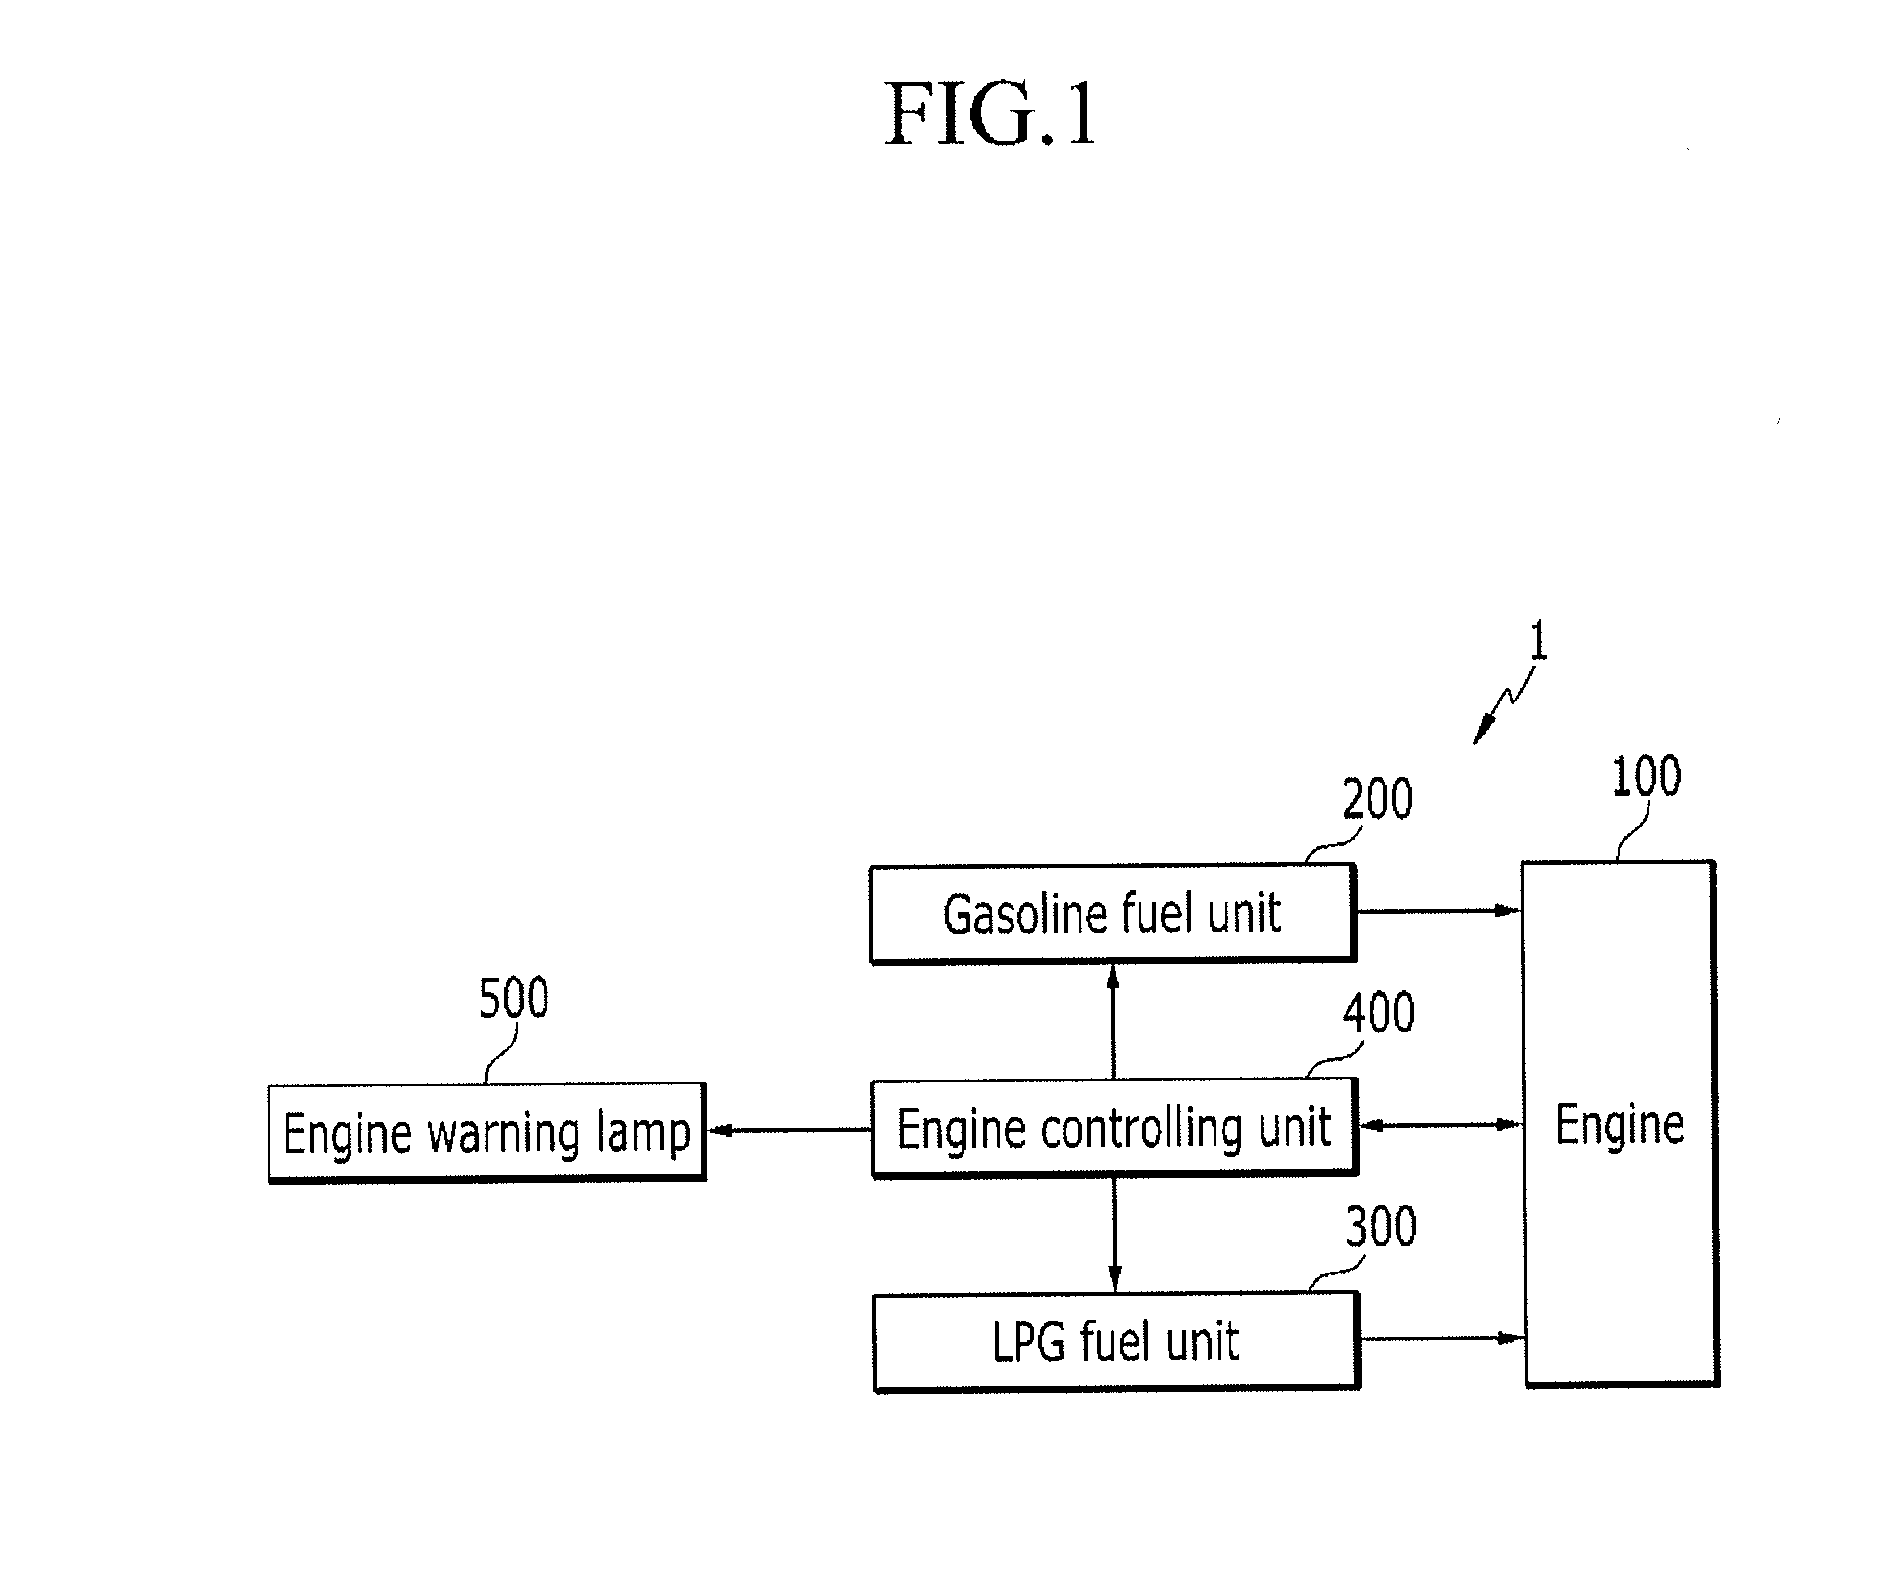 Apparatus and method for controlling fuel supply of bi-fuel vehicle